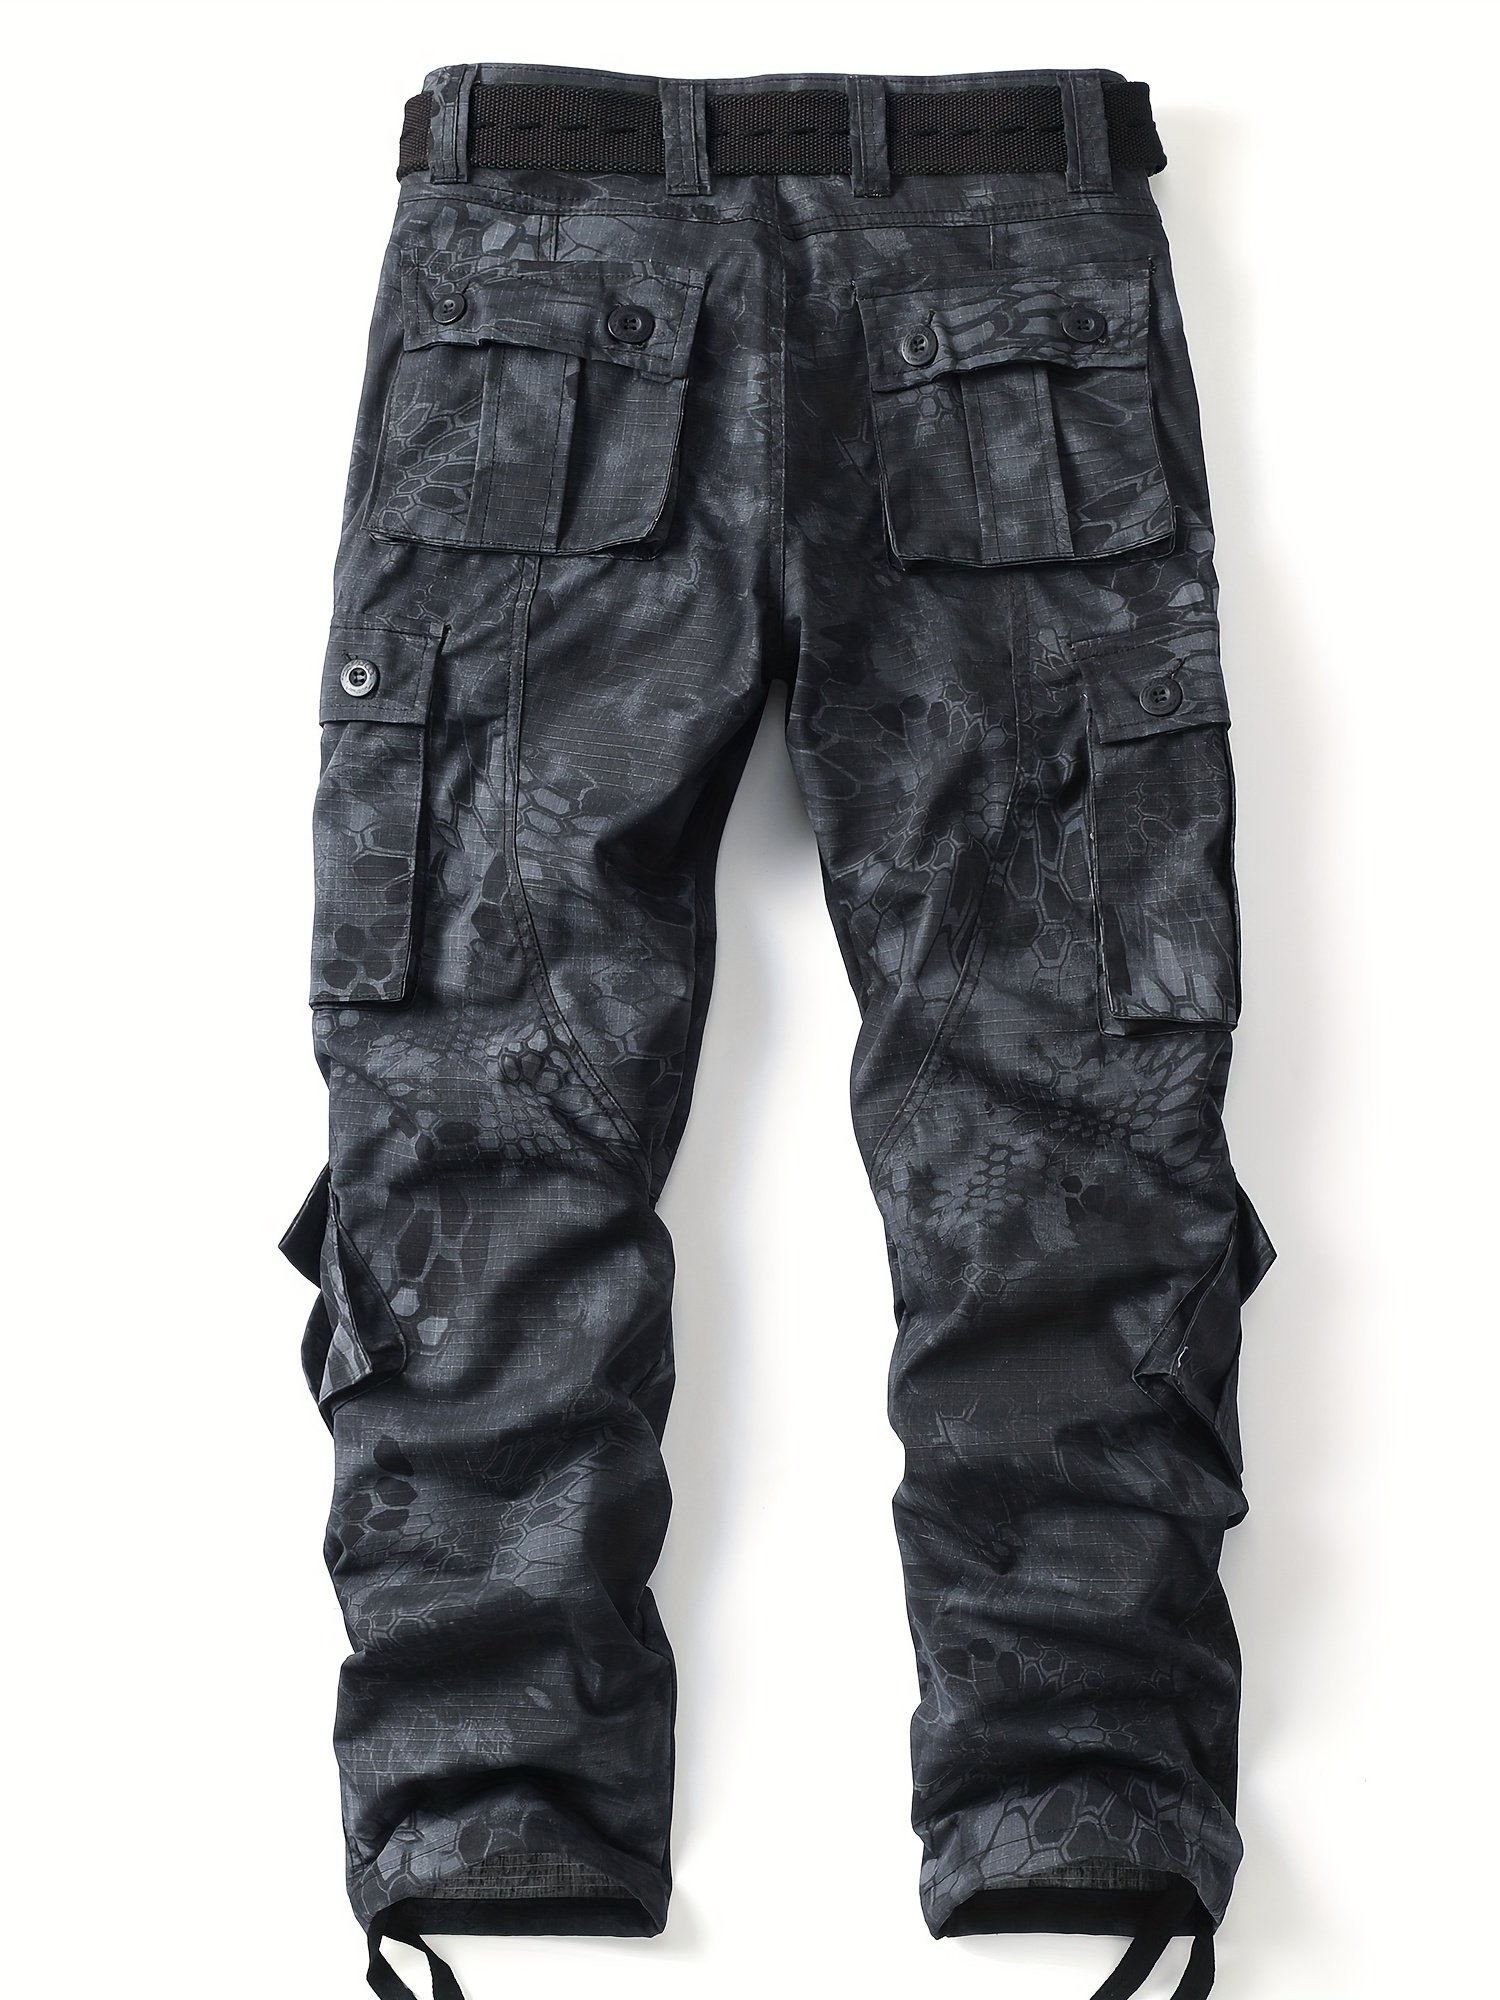 First Tactical Mens Black Defender Pants - Military Outdoors Hiking Trousers